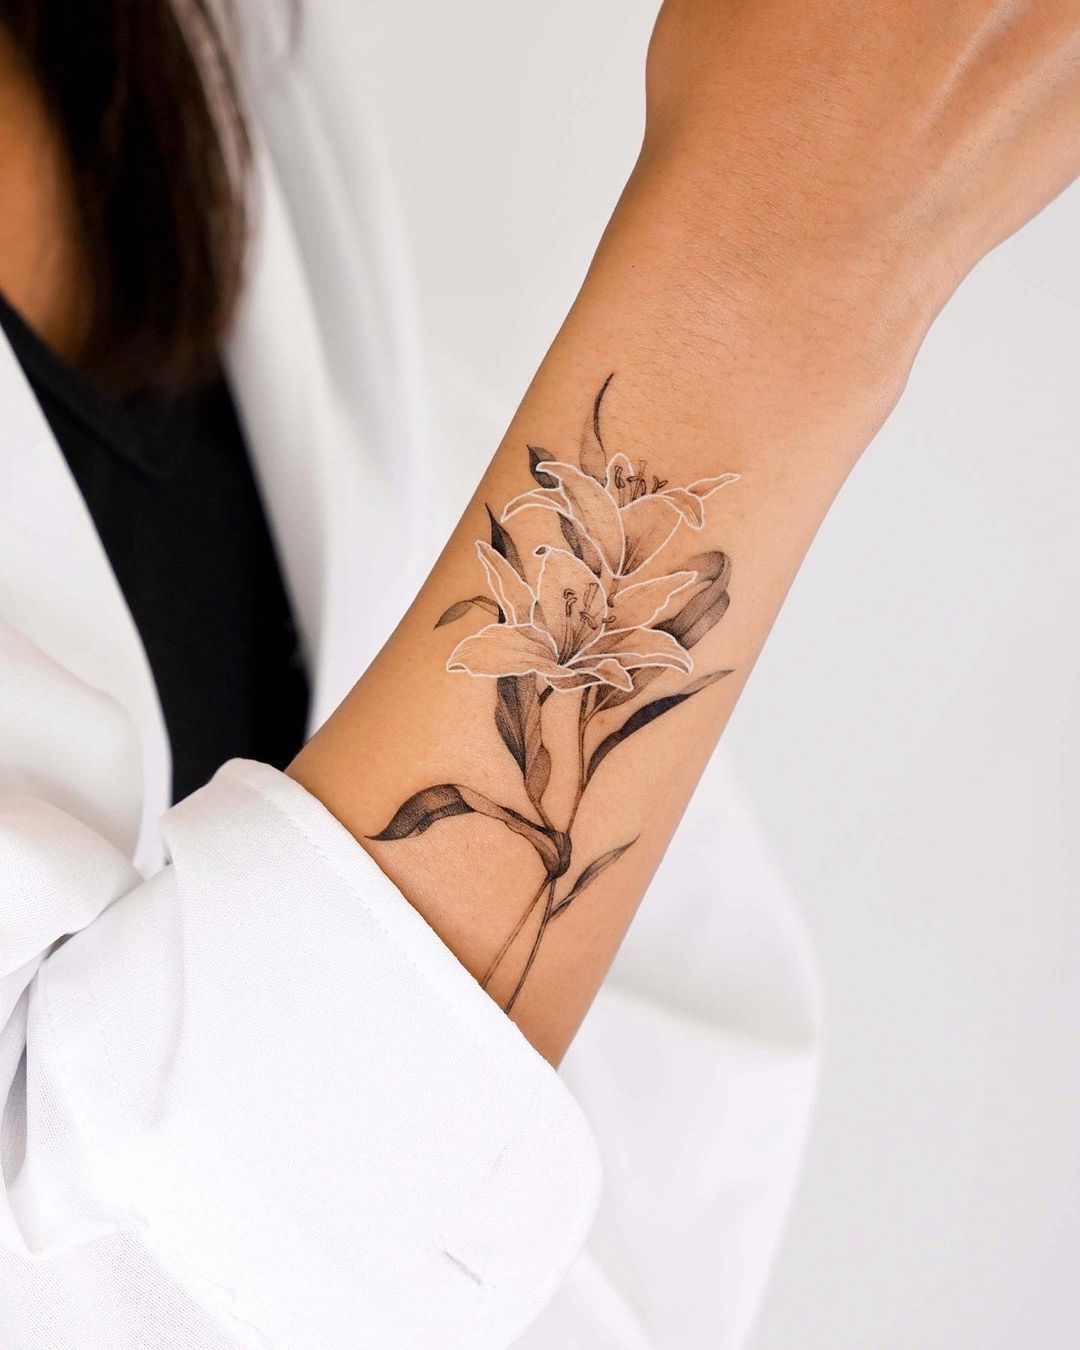 Lily Tattoo Over Arm